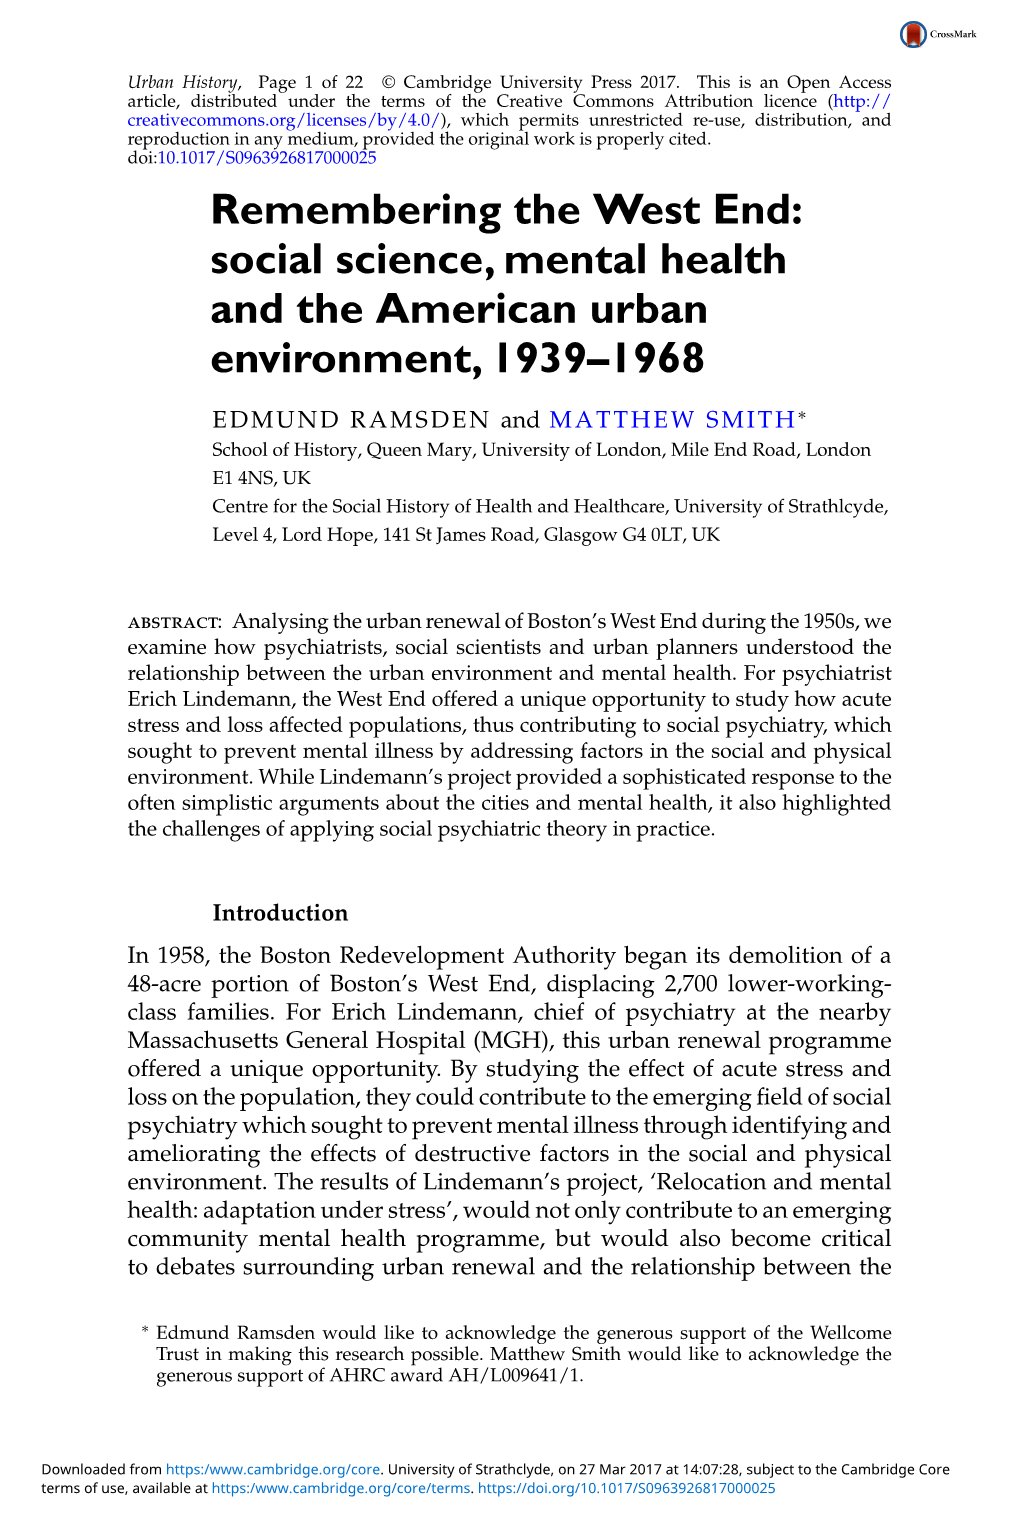 Remembering the West End: Social Science, Mental Health and the American Urban Environment, 1939–1968